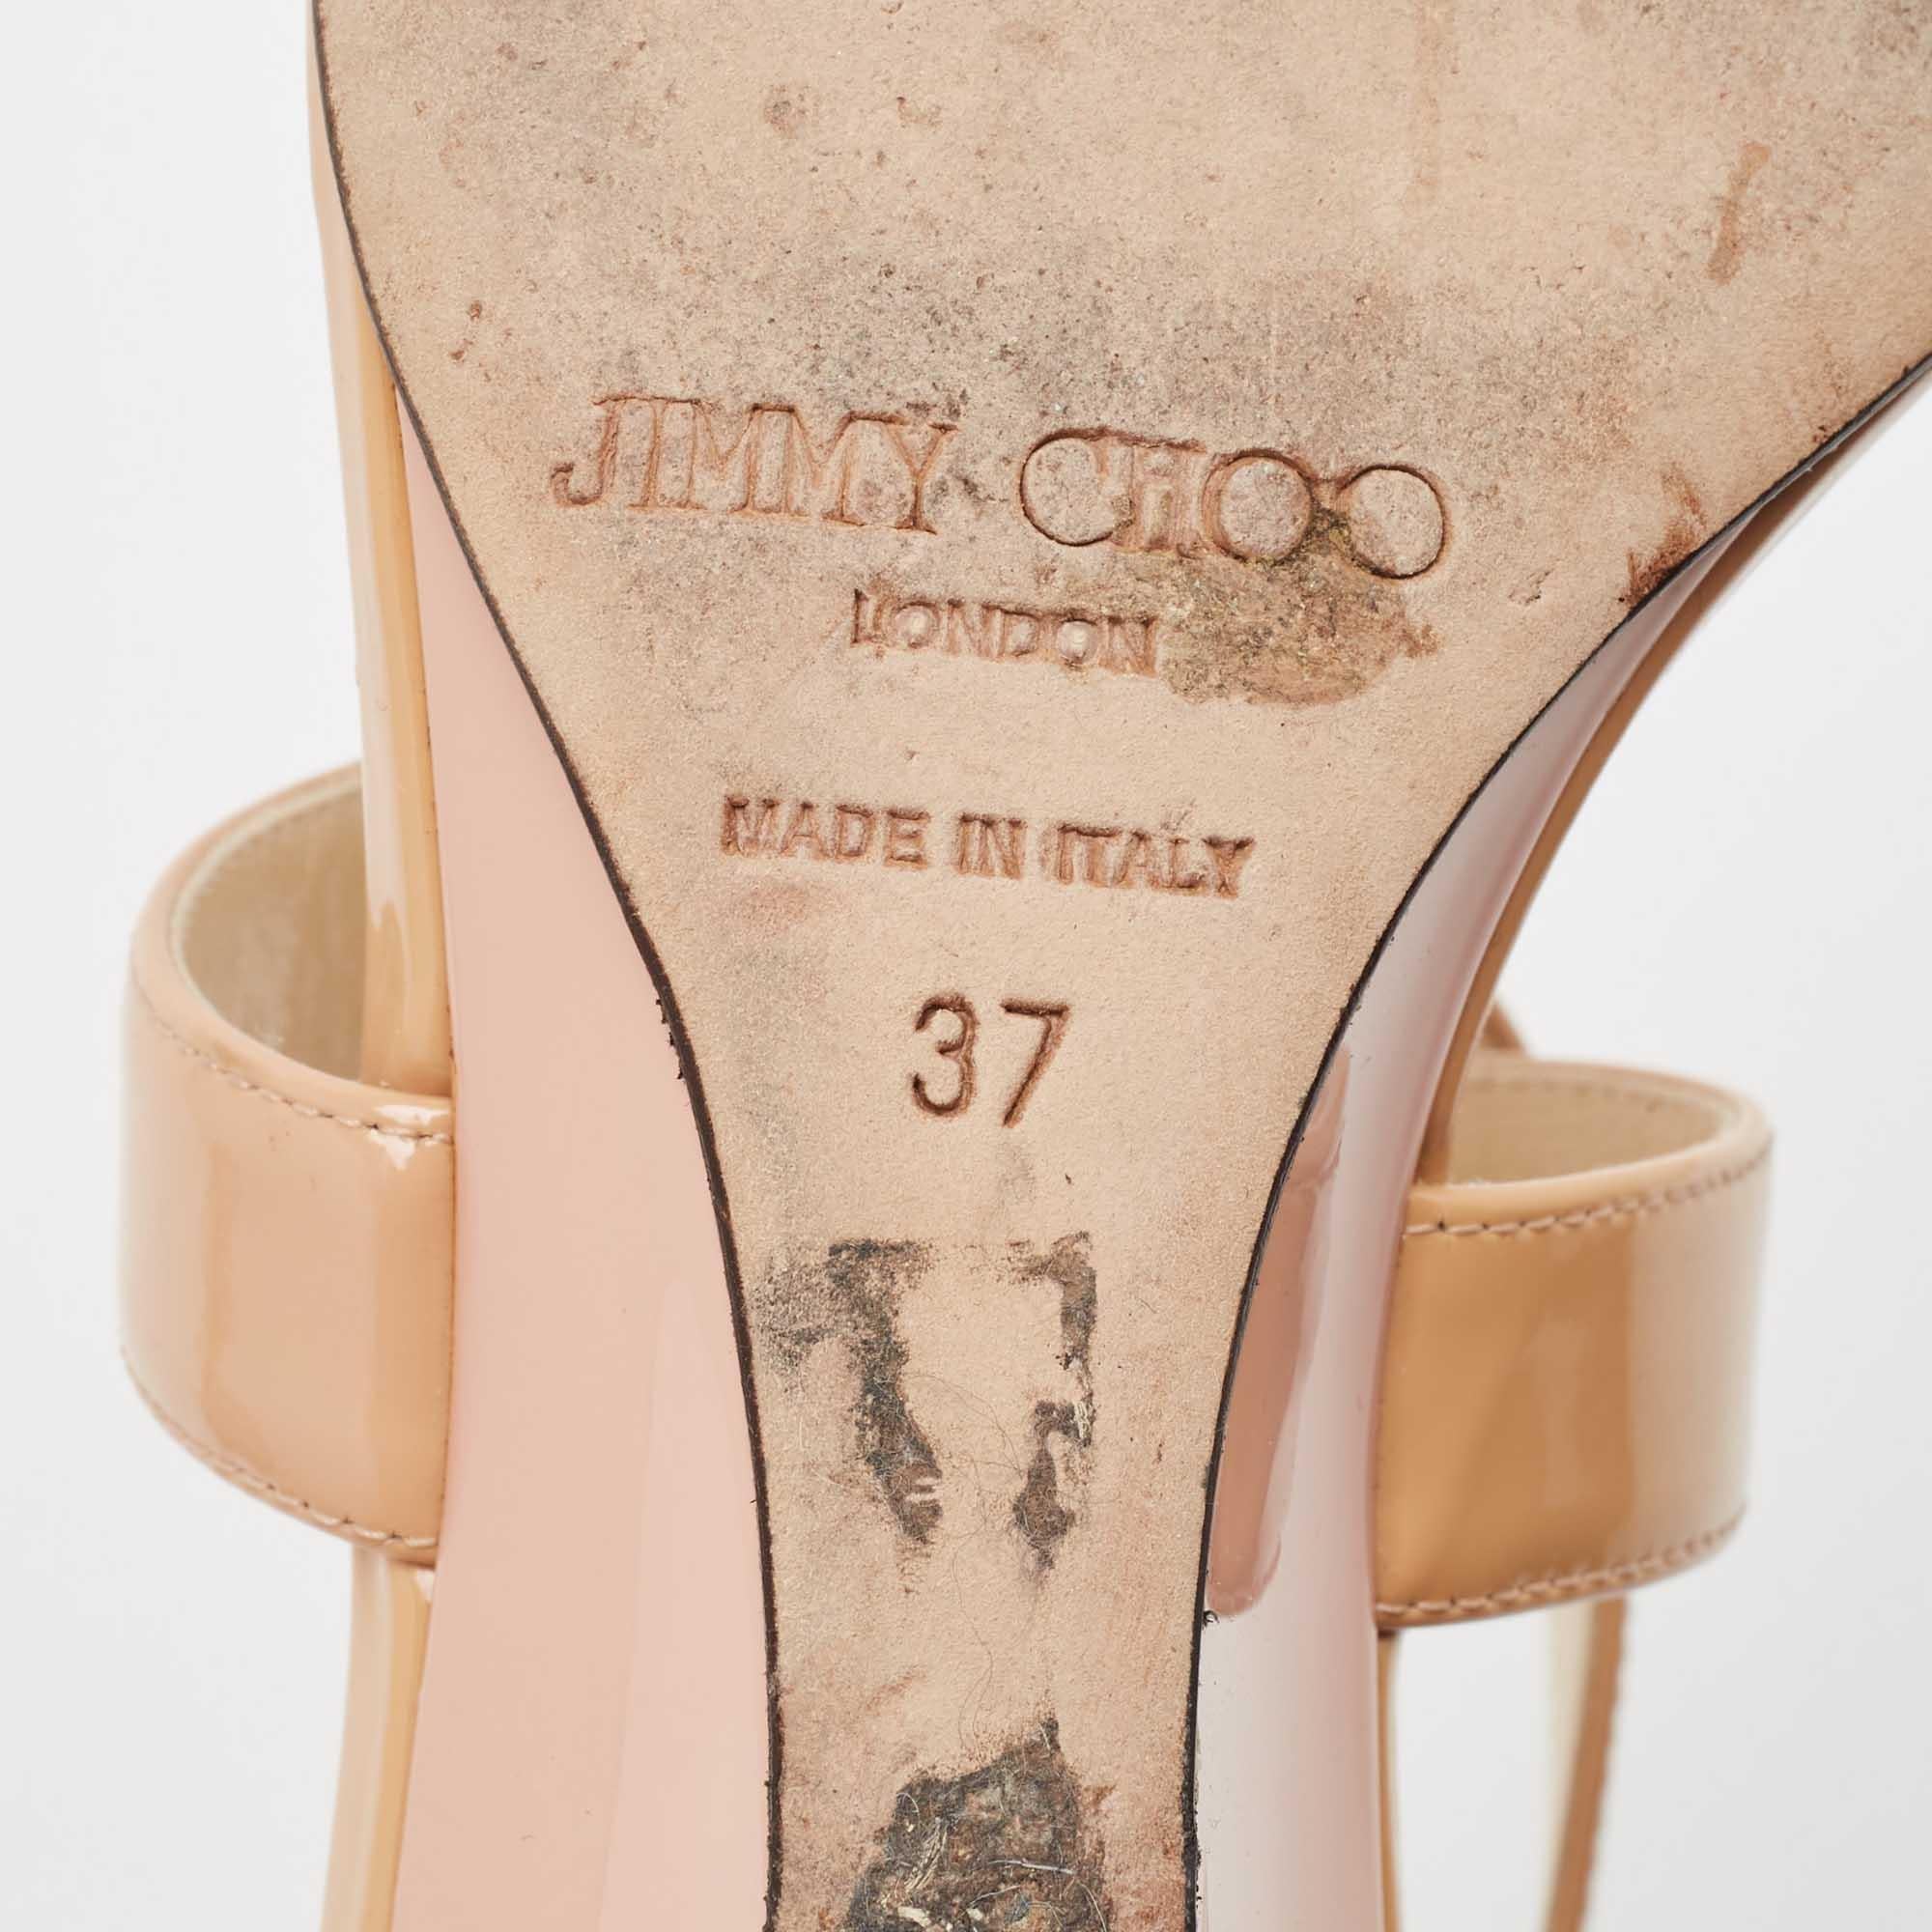 Jimmy Choo Beige Patent Leather Chiara Wedge Sandals Size 37 For Sale 5